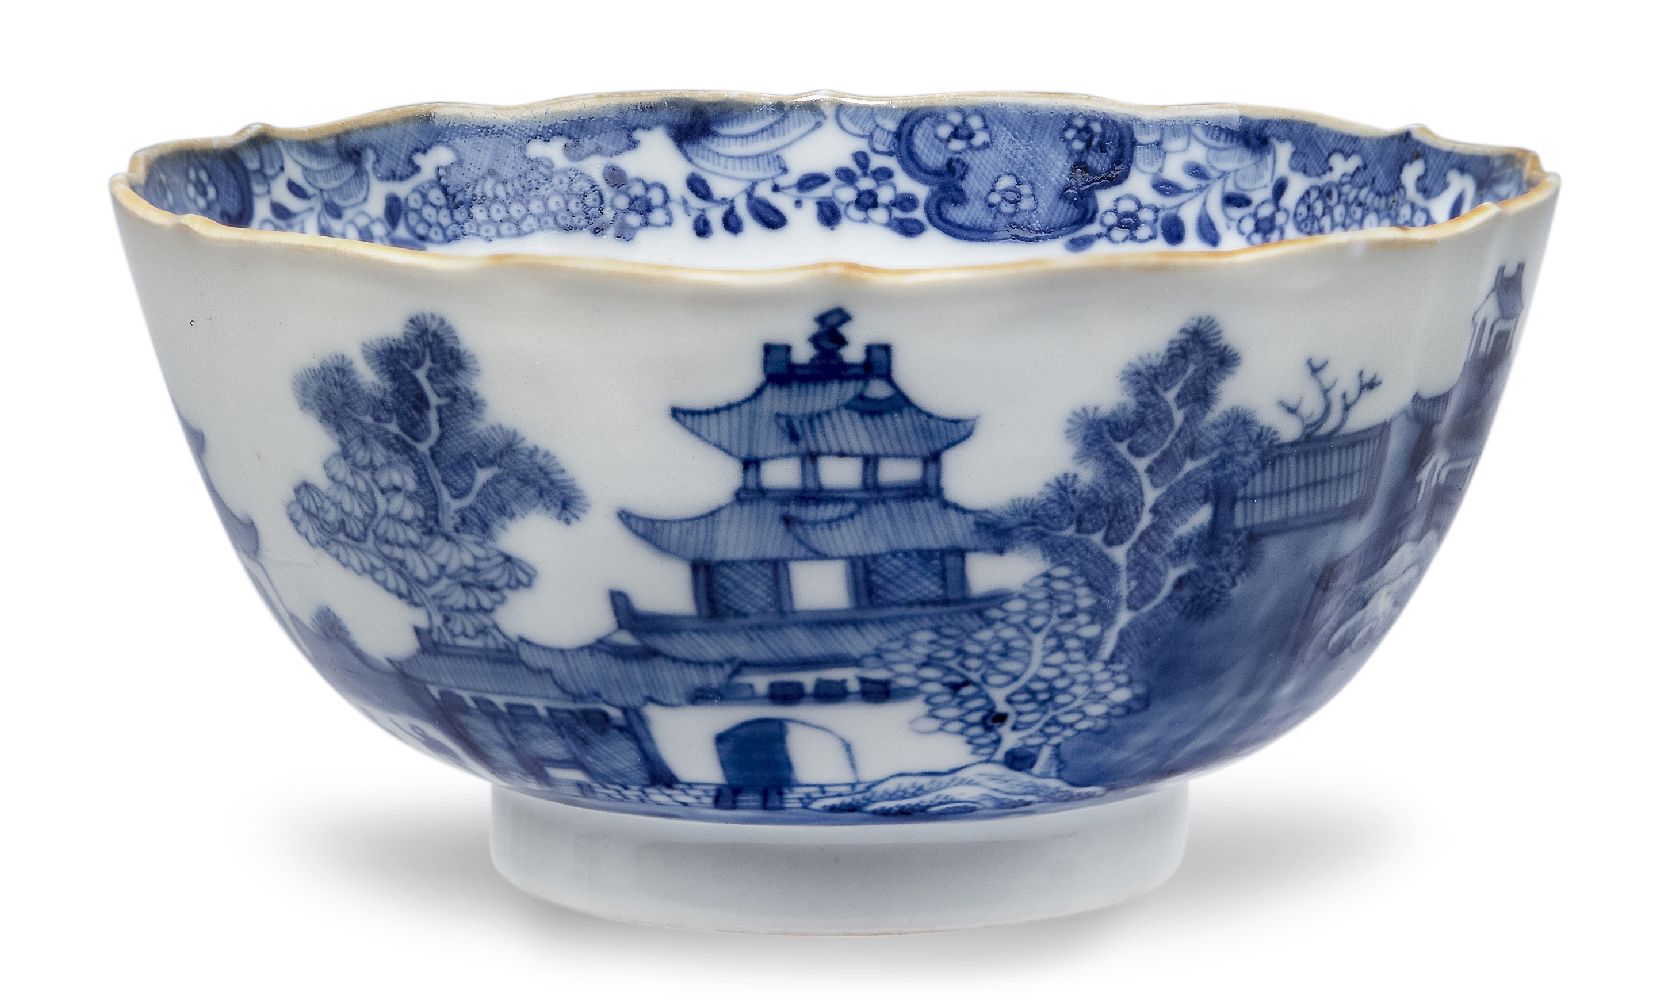 A Chinese porcelain blue and white bowl, 18th century, painted with pagodas in a continuous